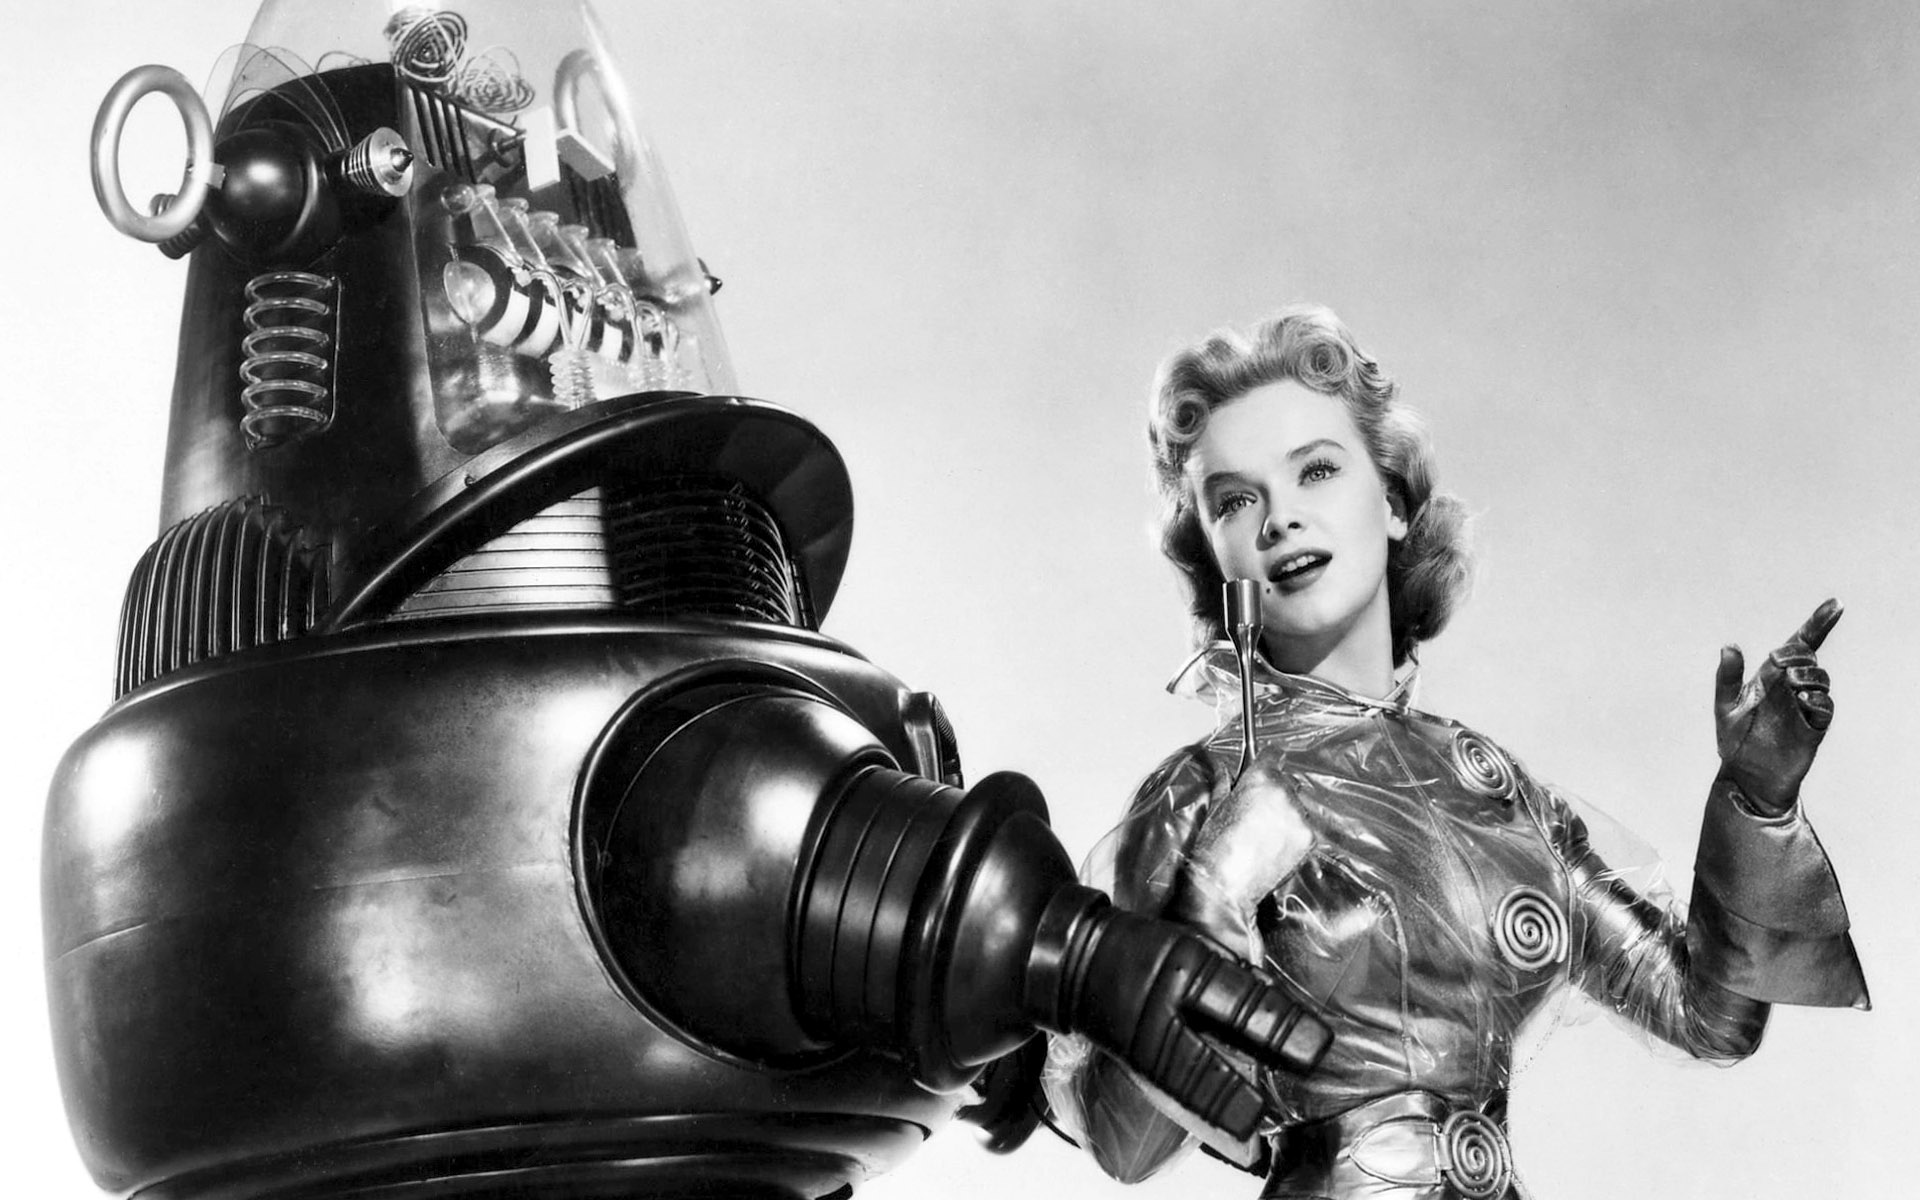 forbidden planet, movie, anne francis, robby the robot